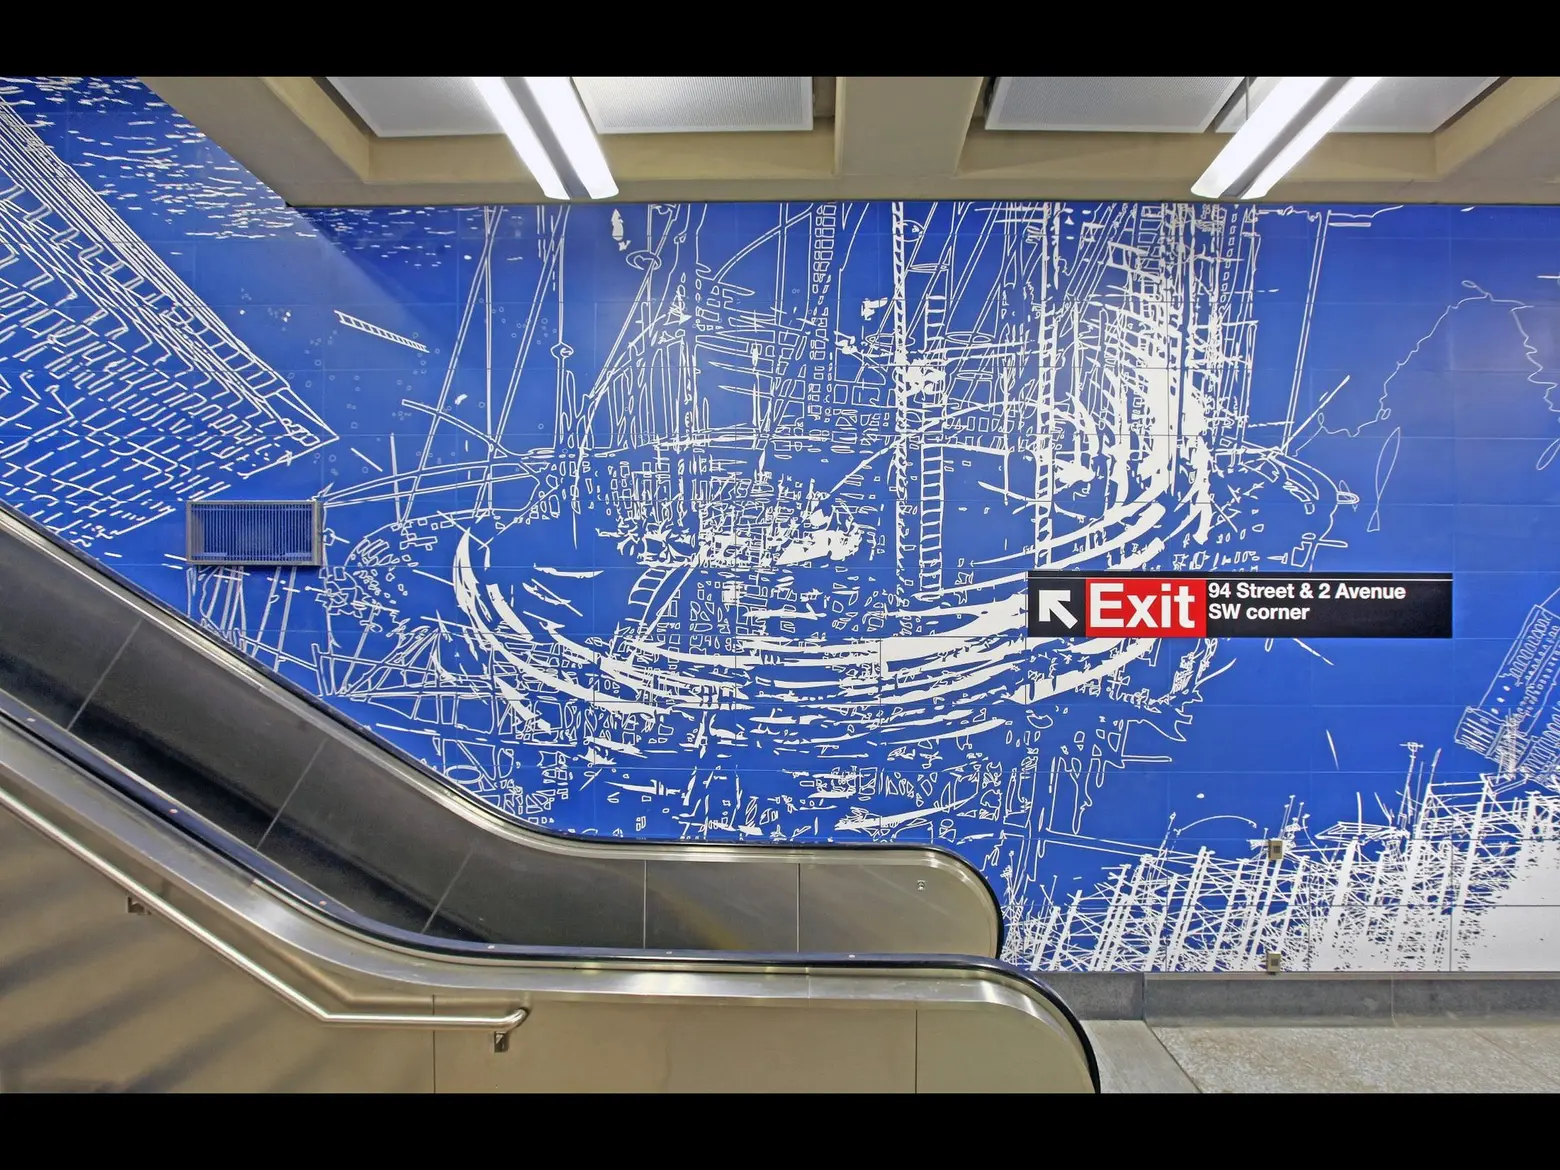 EVENT: Explore the art and architecture of the Second Avenue Subway with a 6sqft editor